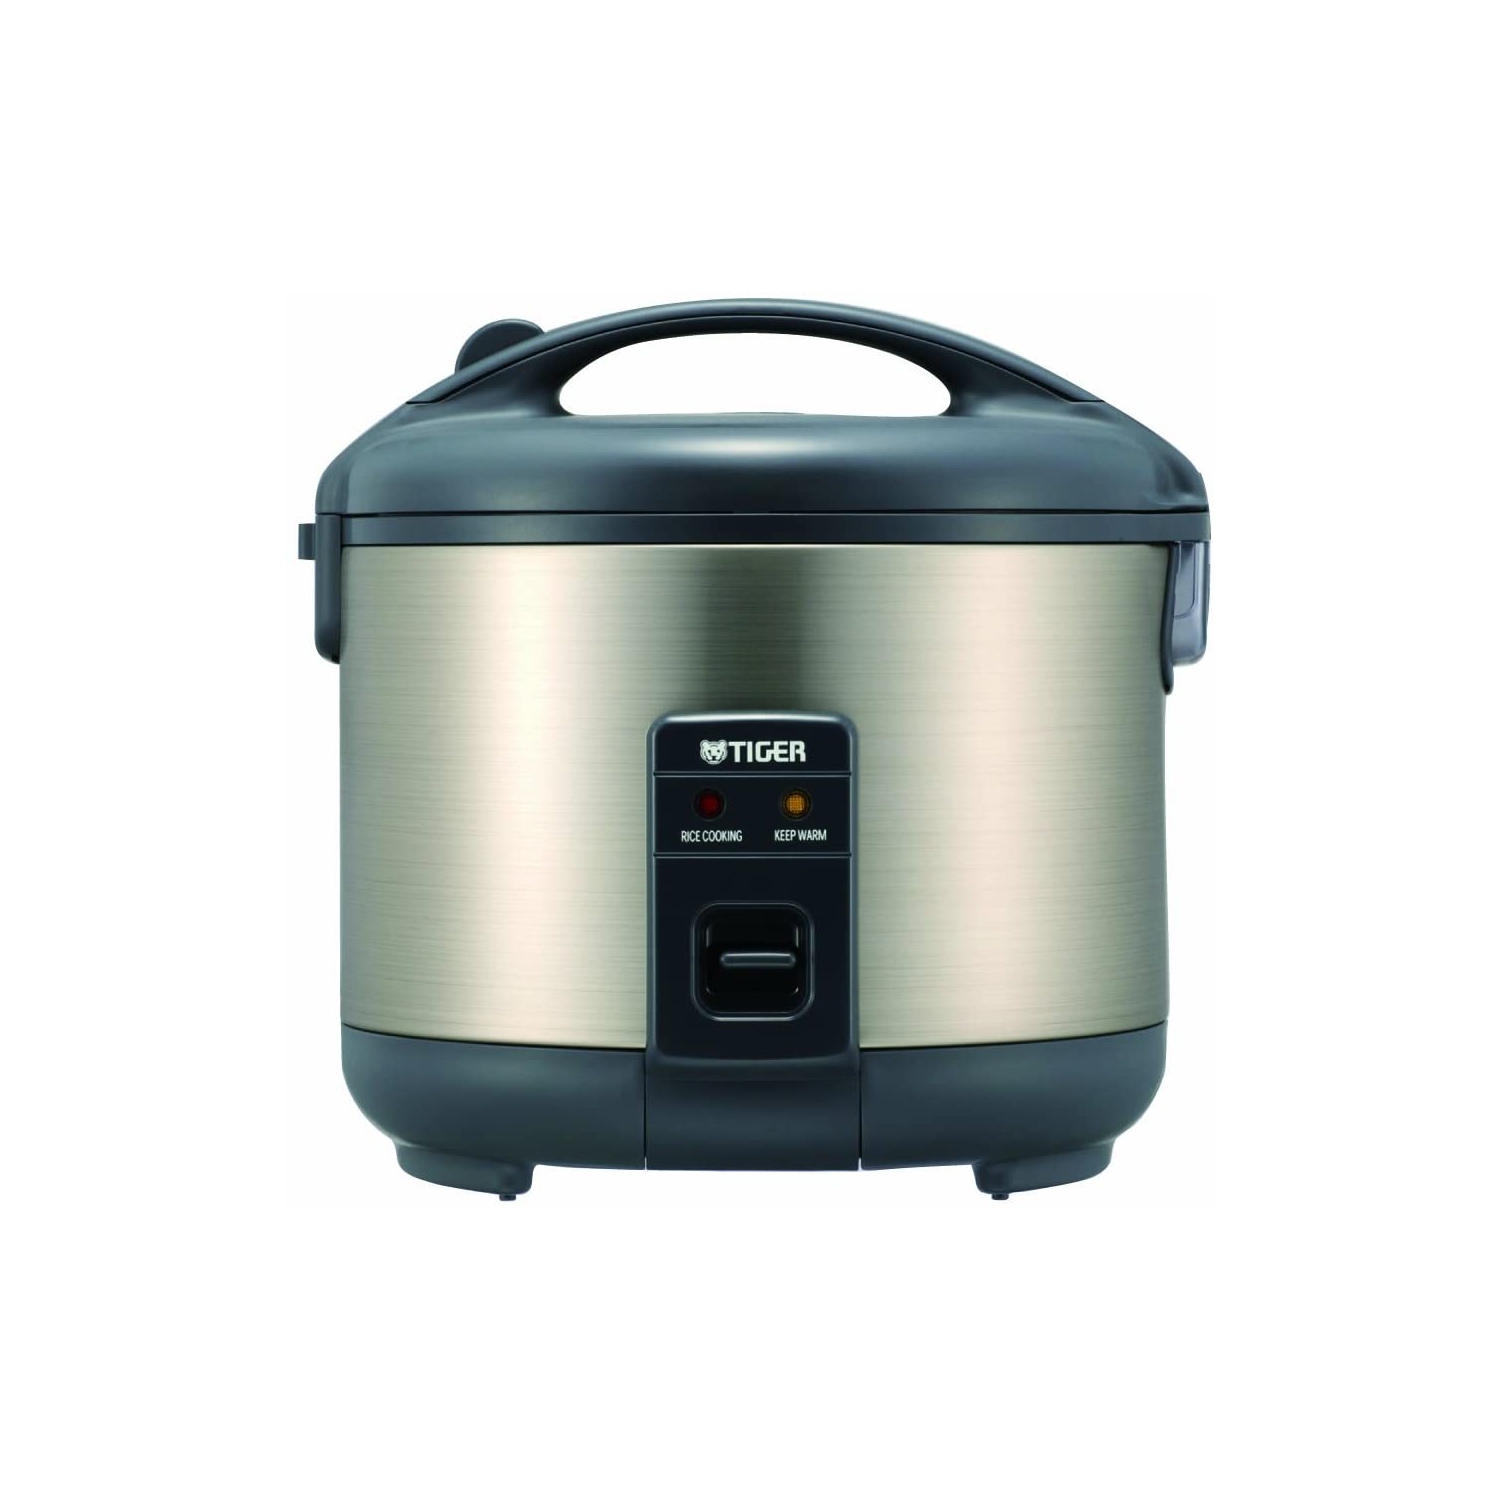 Tiger JNP-S10U Stainless Steel Conventional Rice Cooker, 5.5 Cups - Made in Japan